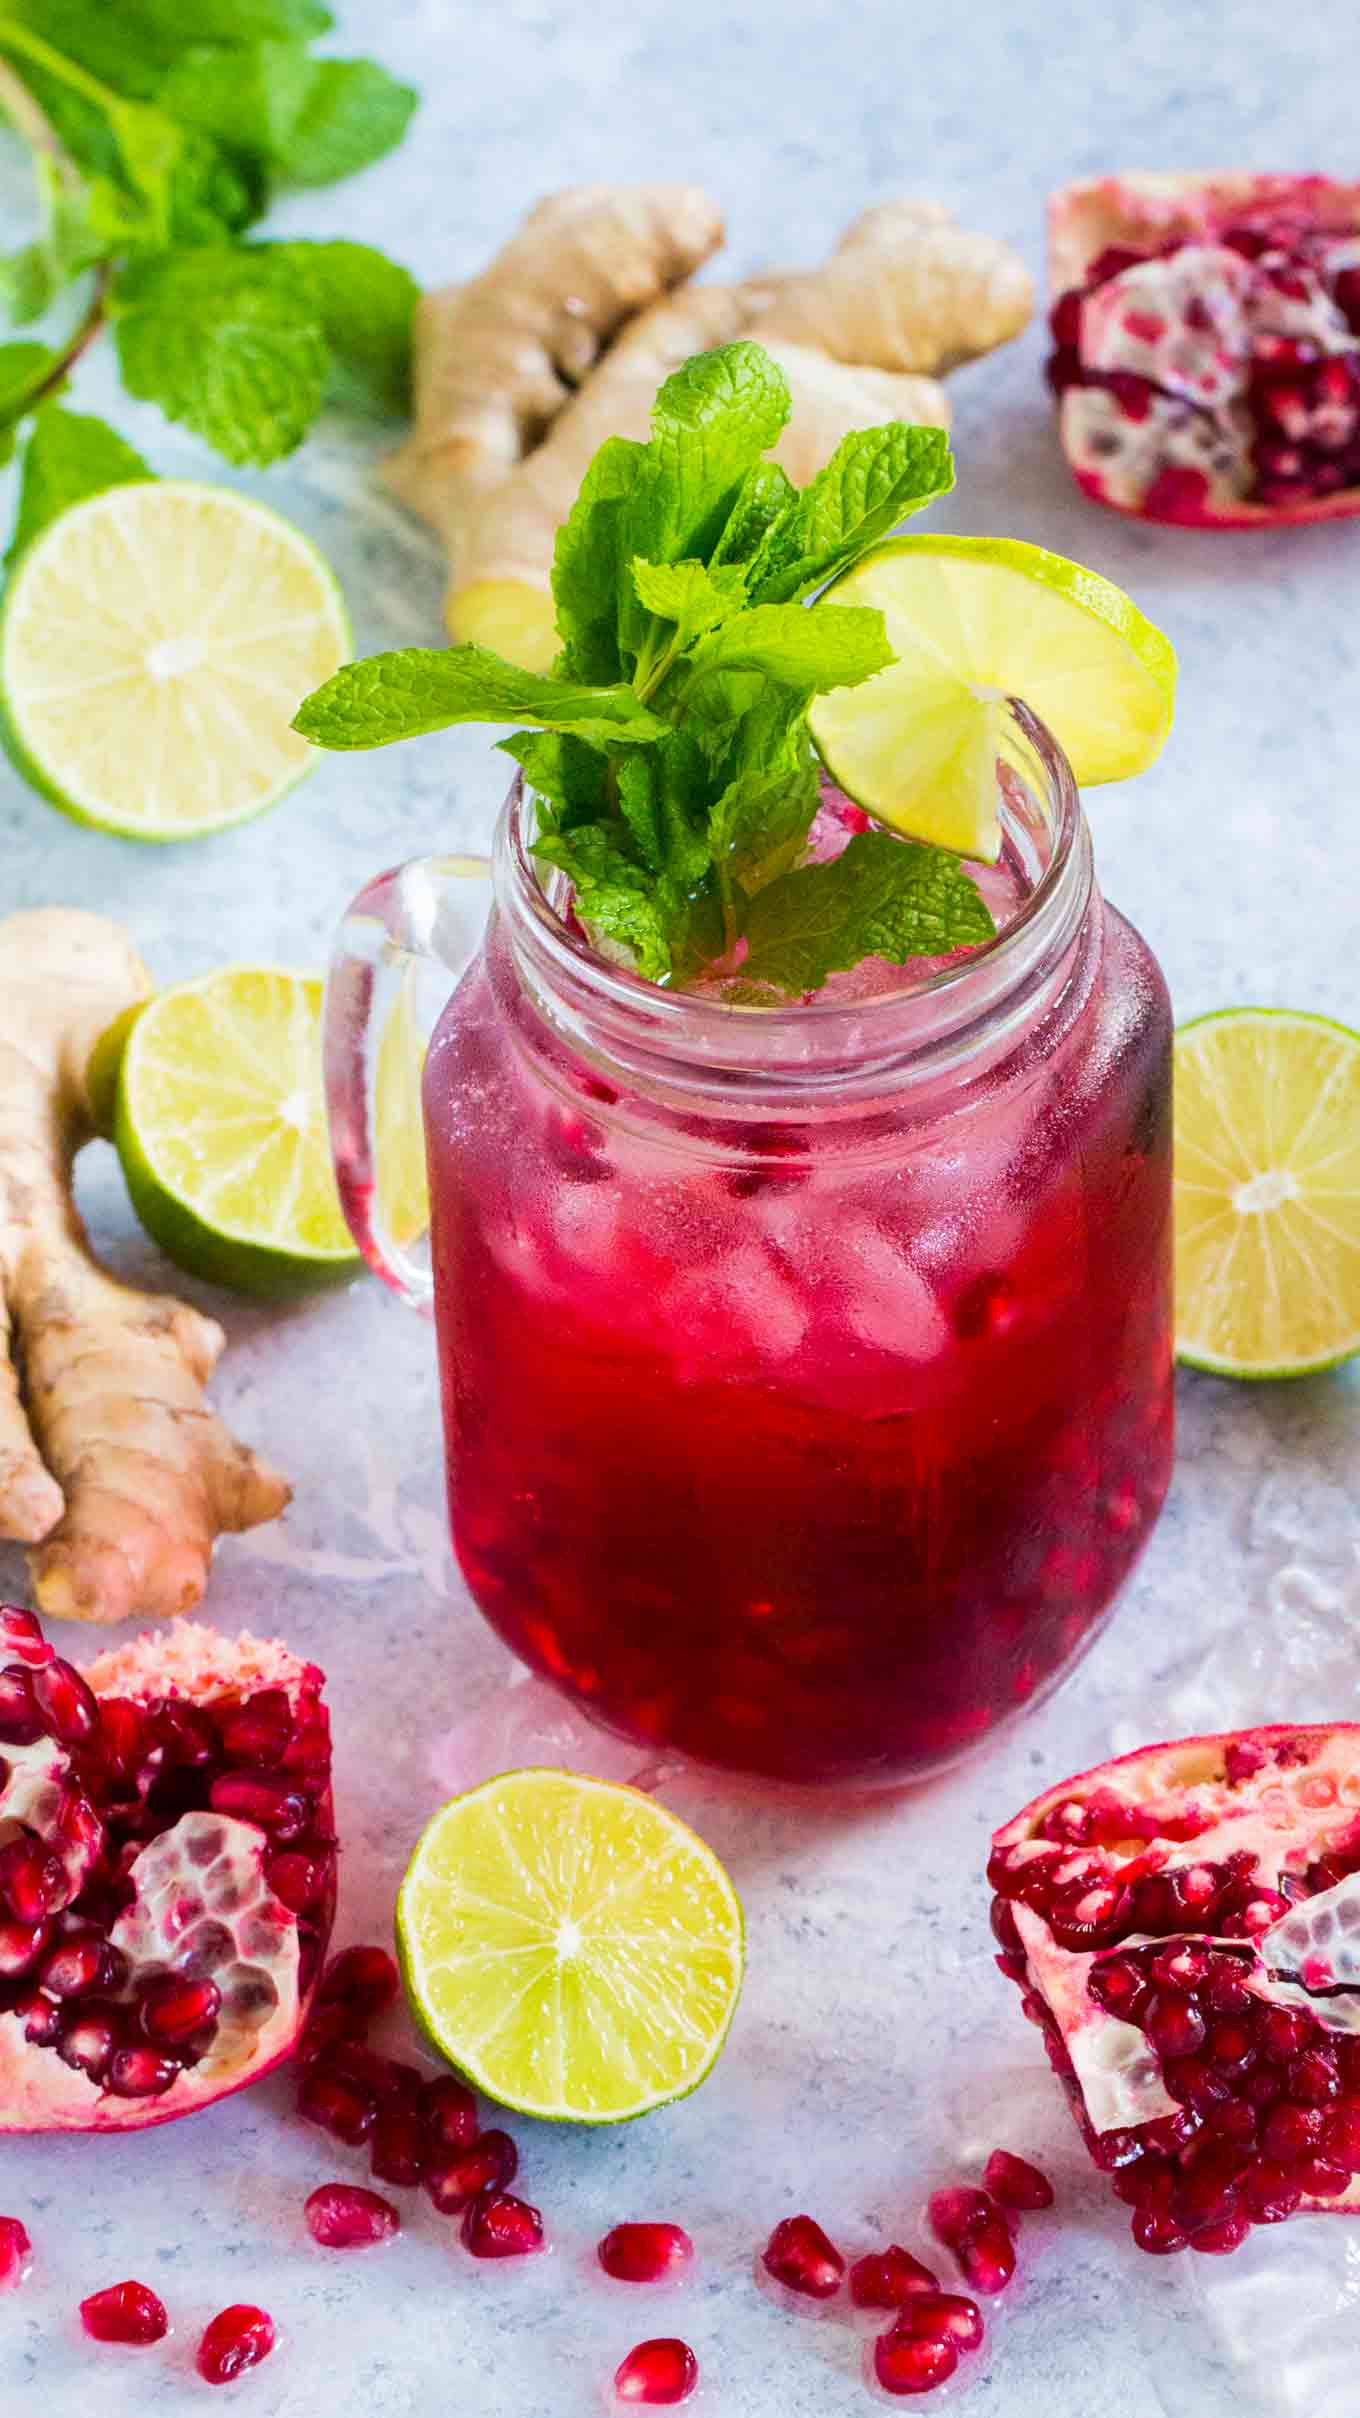 Ginger Pomegranate Mojito Ultimate List of Holiday Cocktail & Mocktail Recipes